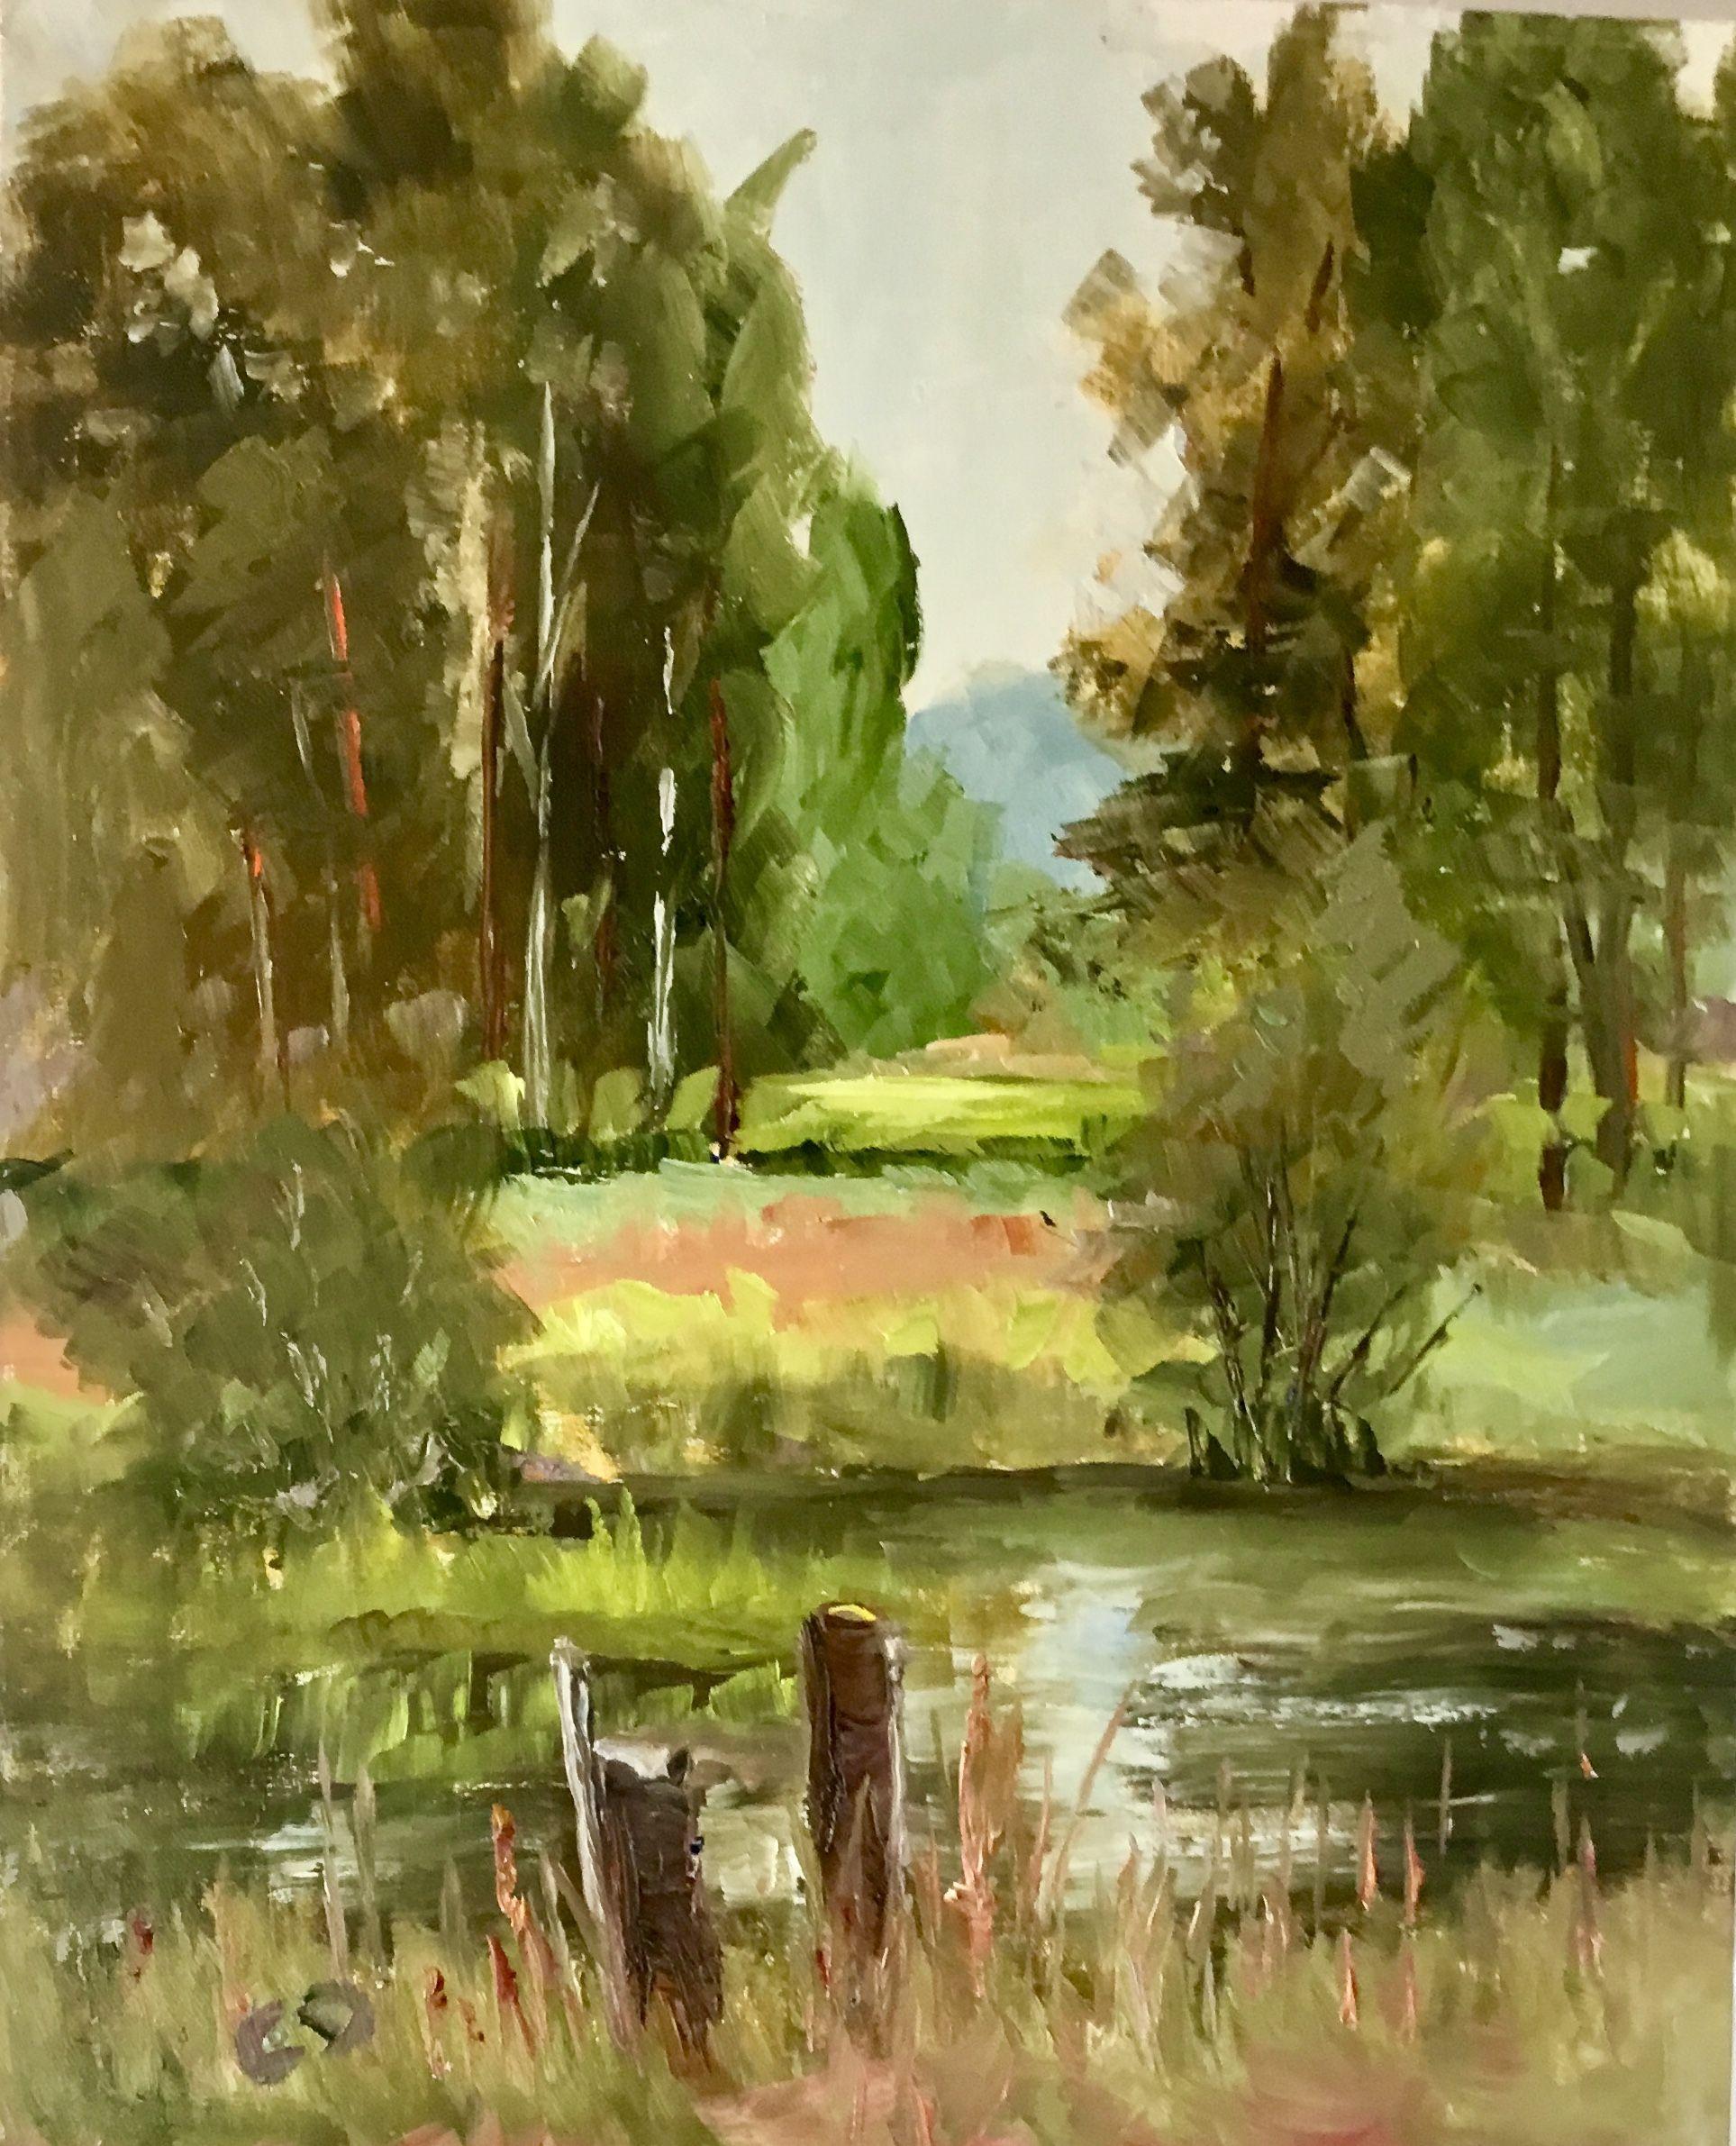 Egans Slough is located in the Flathead Valley, Montana. The reflections drew me to the scene. Also the fence posts that seemed to point at the sky reflection and to the opening in the trees.  :: Painting :: Impressionist :: This piece comes with an